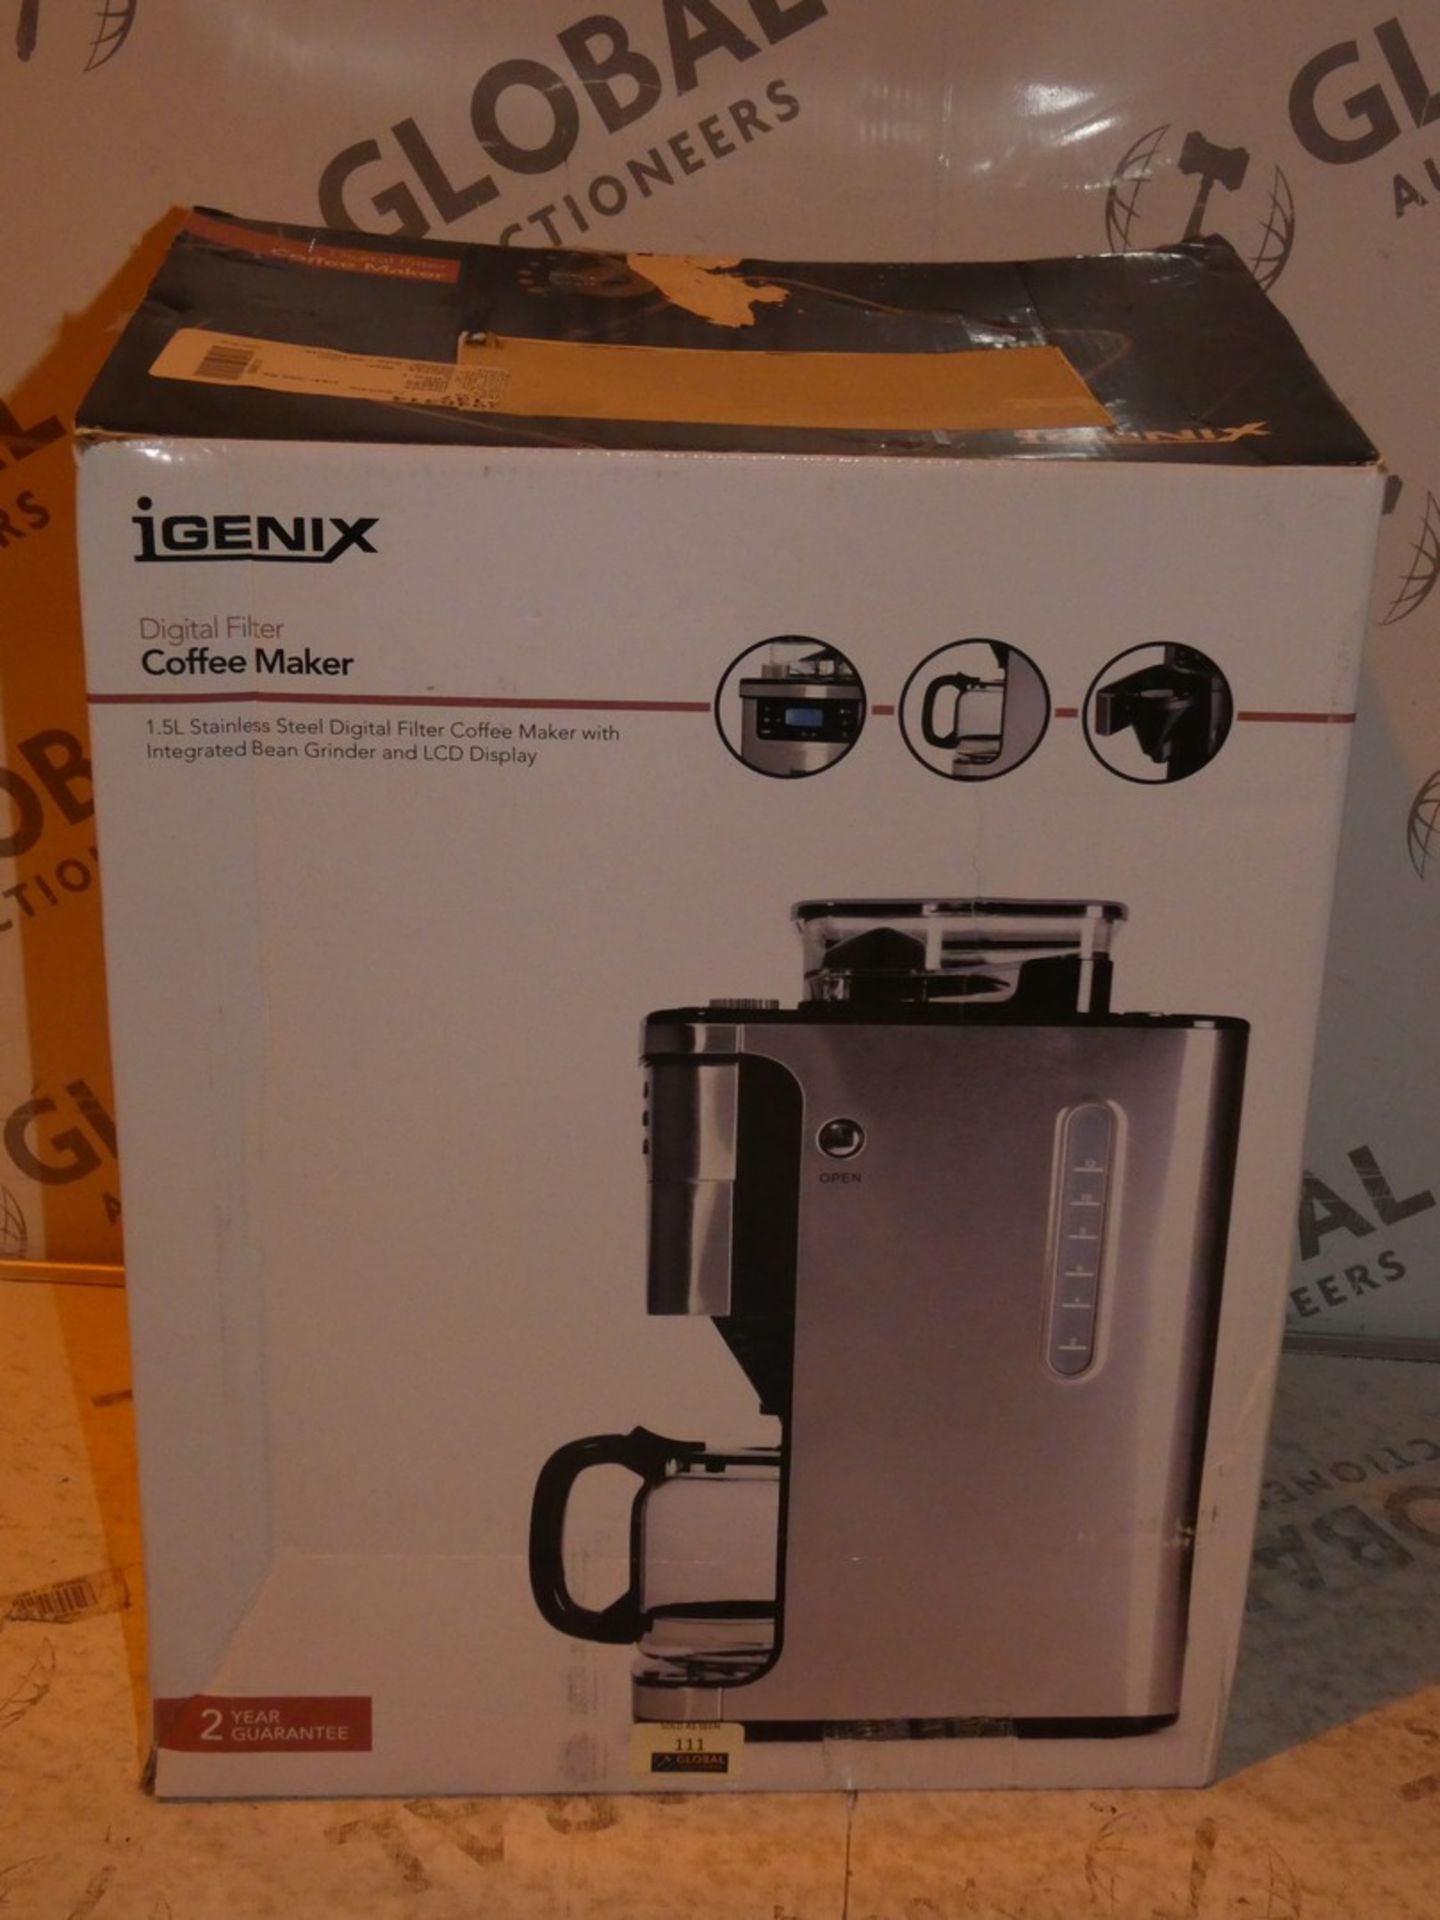 Boxed Igenix Digital Filter 1.5 Litre Stainless Steel Coffee Maker With LCD Display RRP £65 (